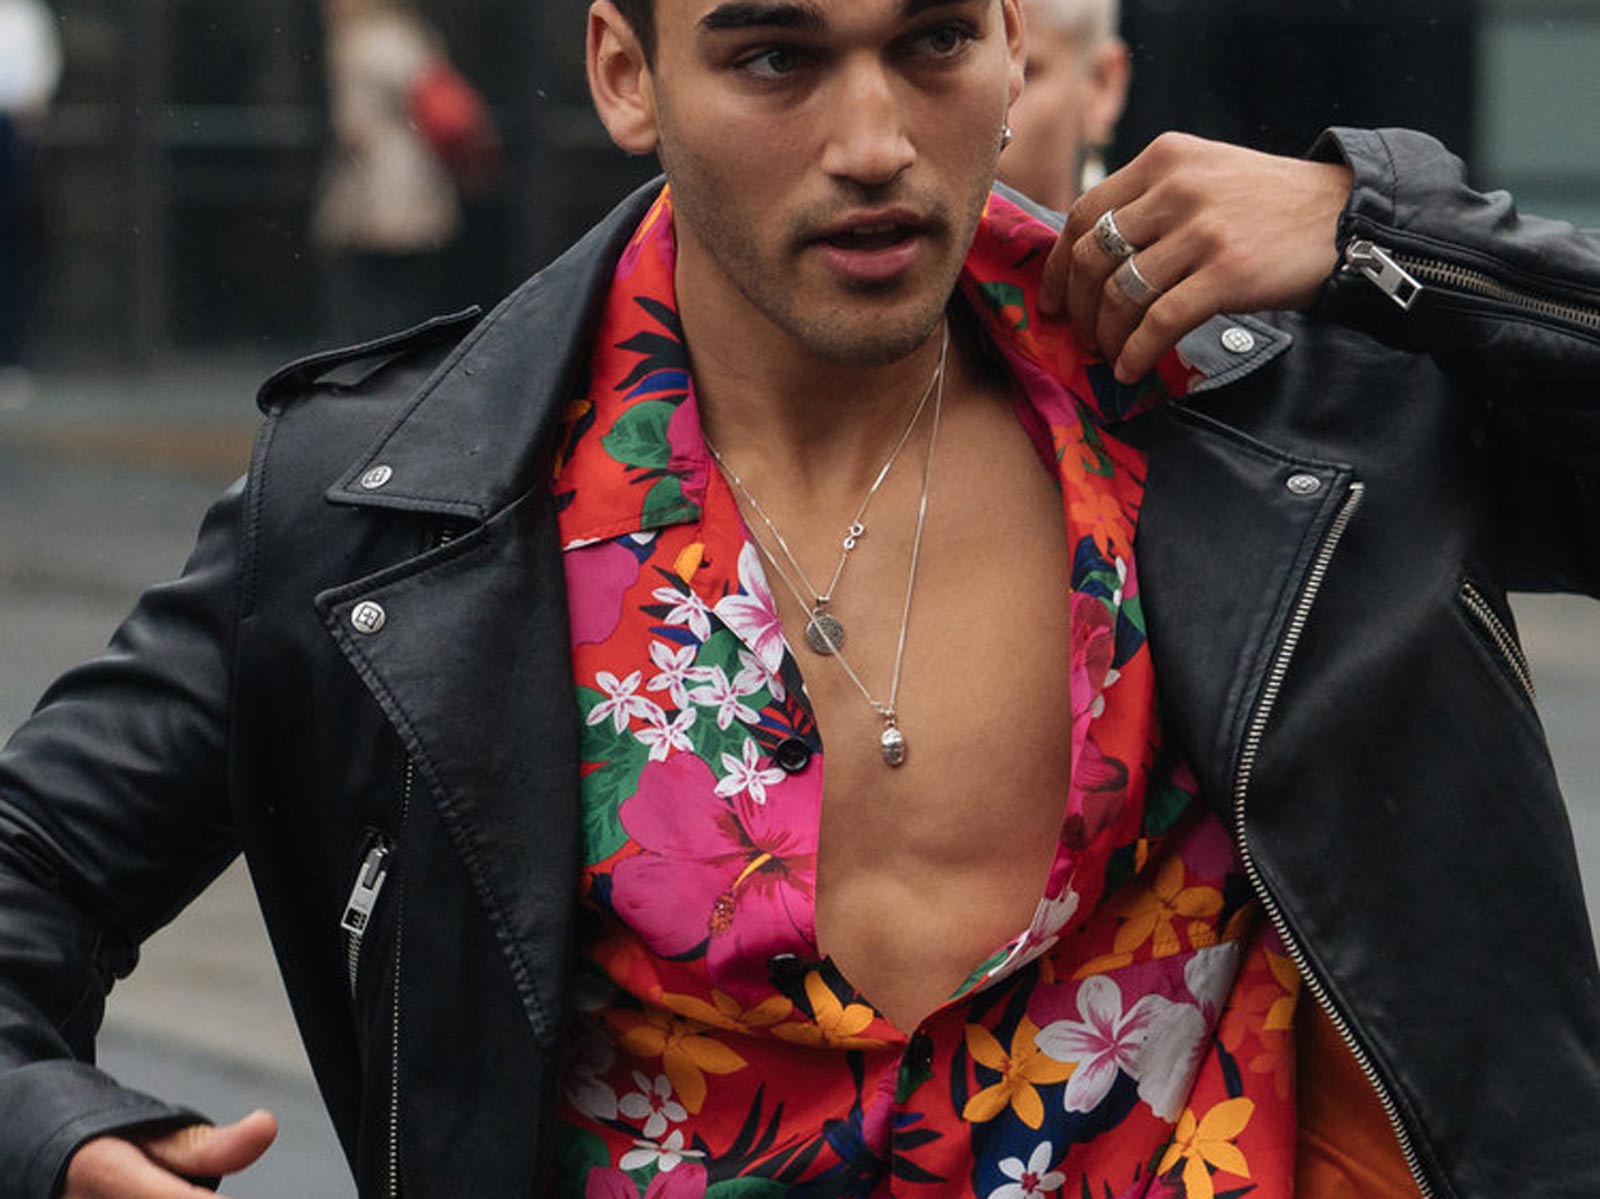 Man wearing bright floral shirt and leather jacket